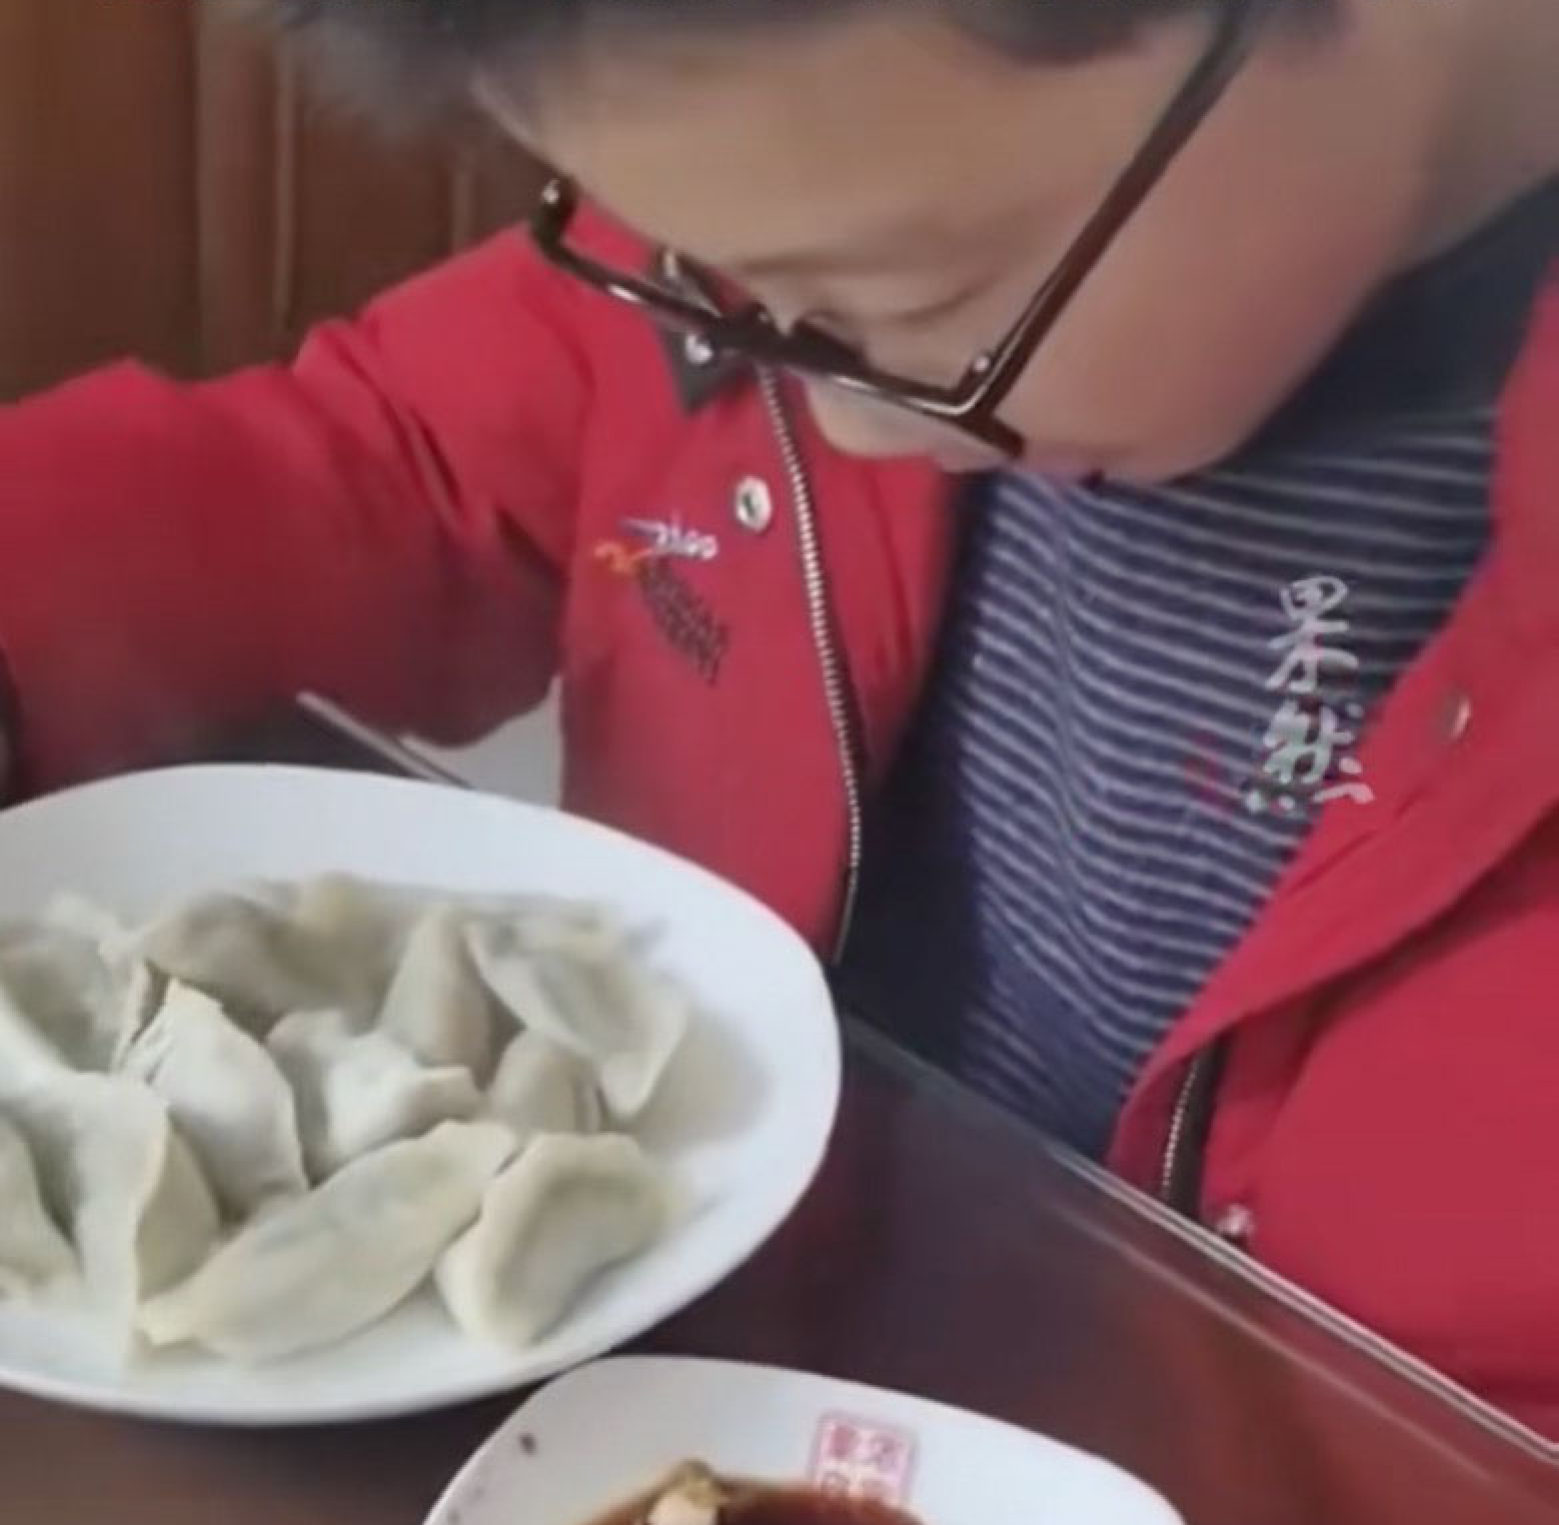 One person online suggested the boy savouring the dumplings, ensuring an unforgettable taste forever. Photo: Douyin